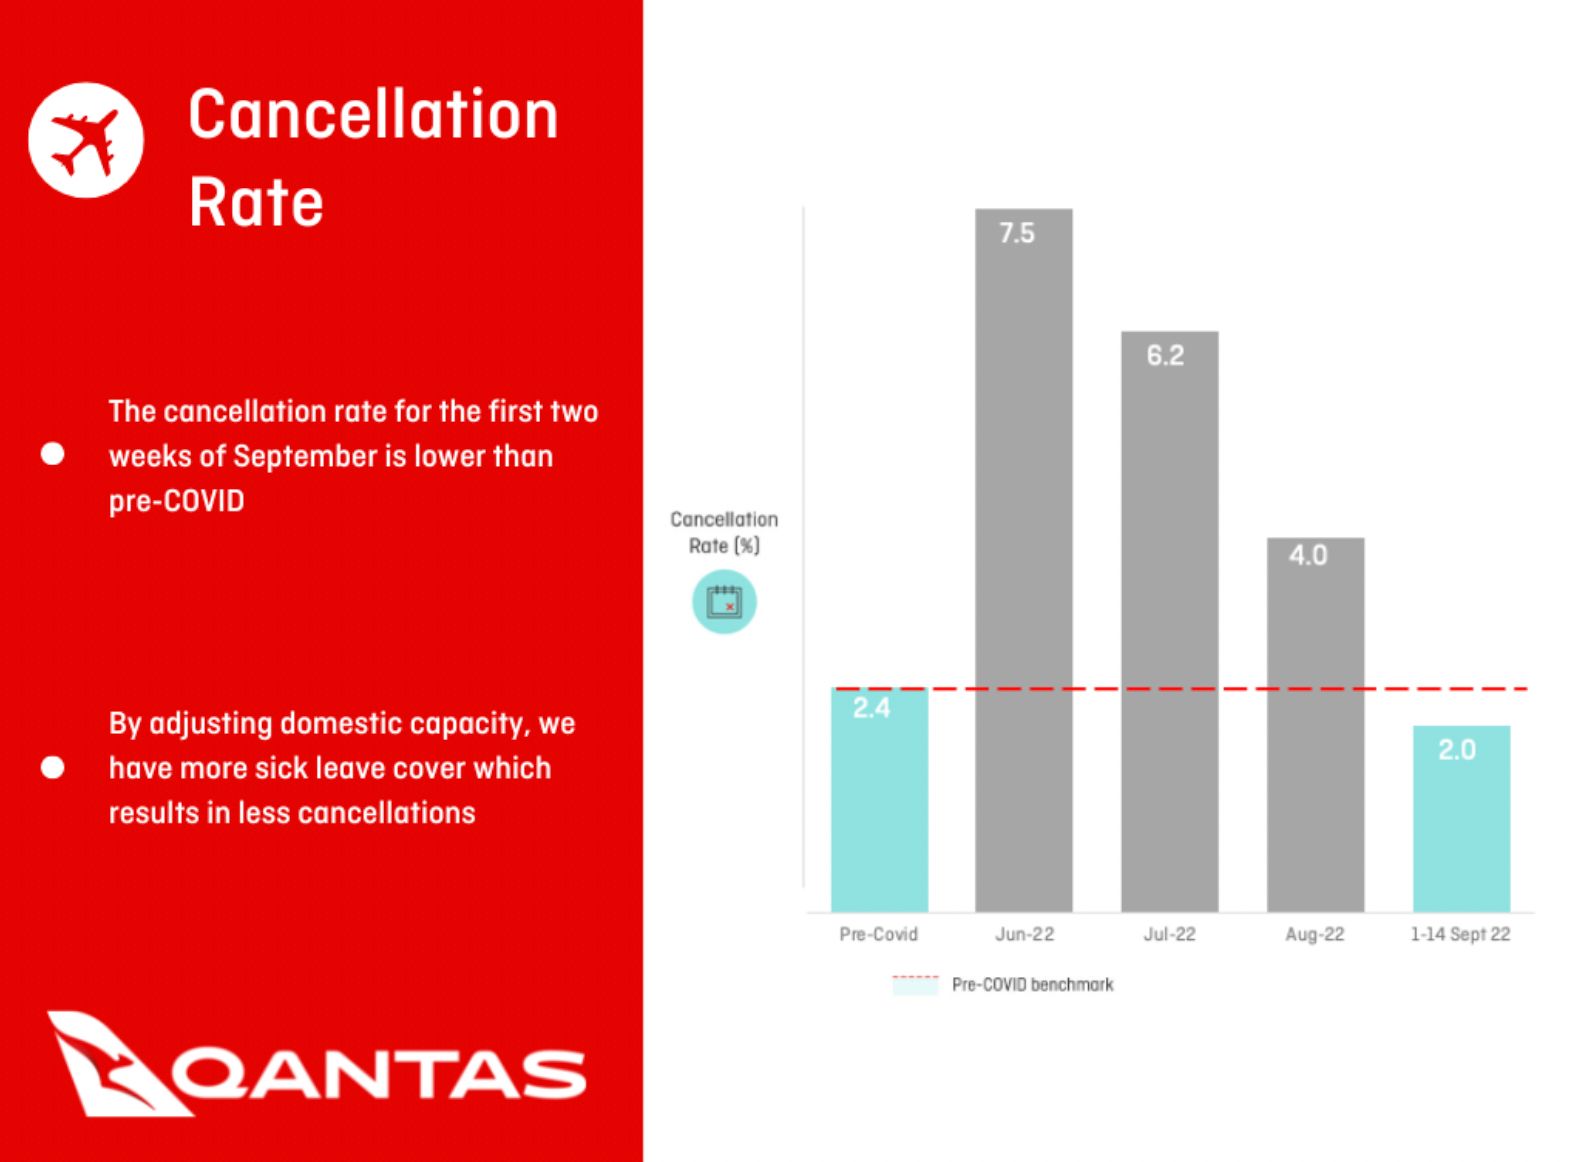 Qantas Cancellation Rate has dropped to just 2% of scheduled flights.